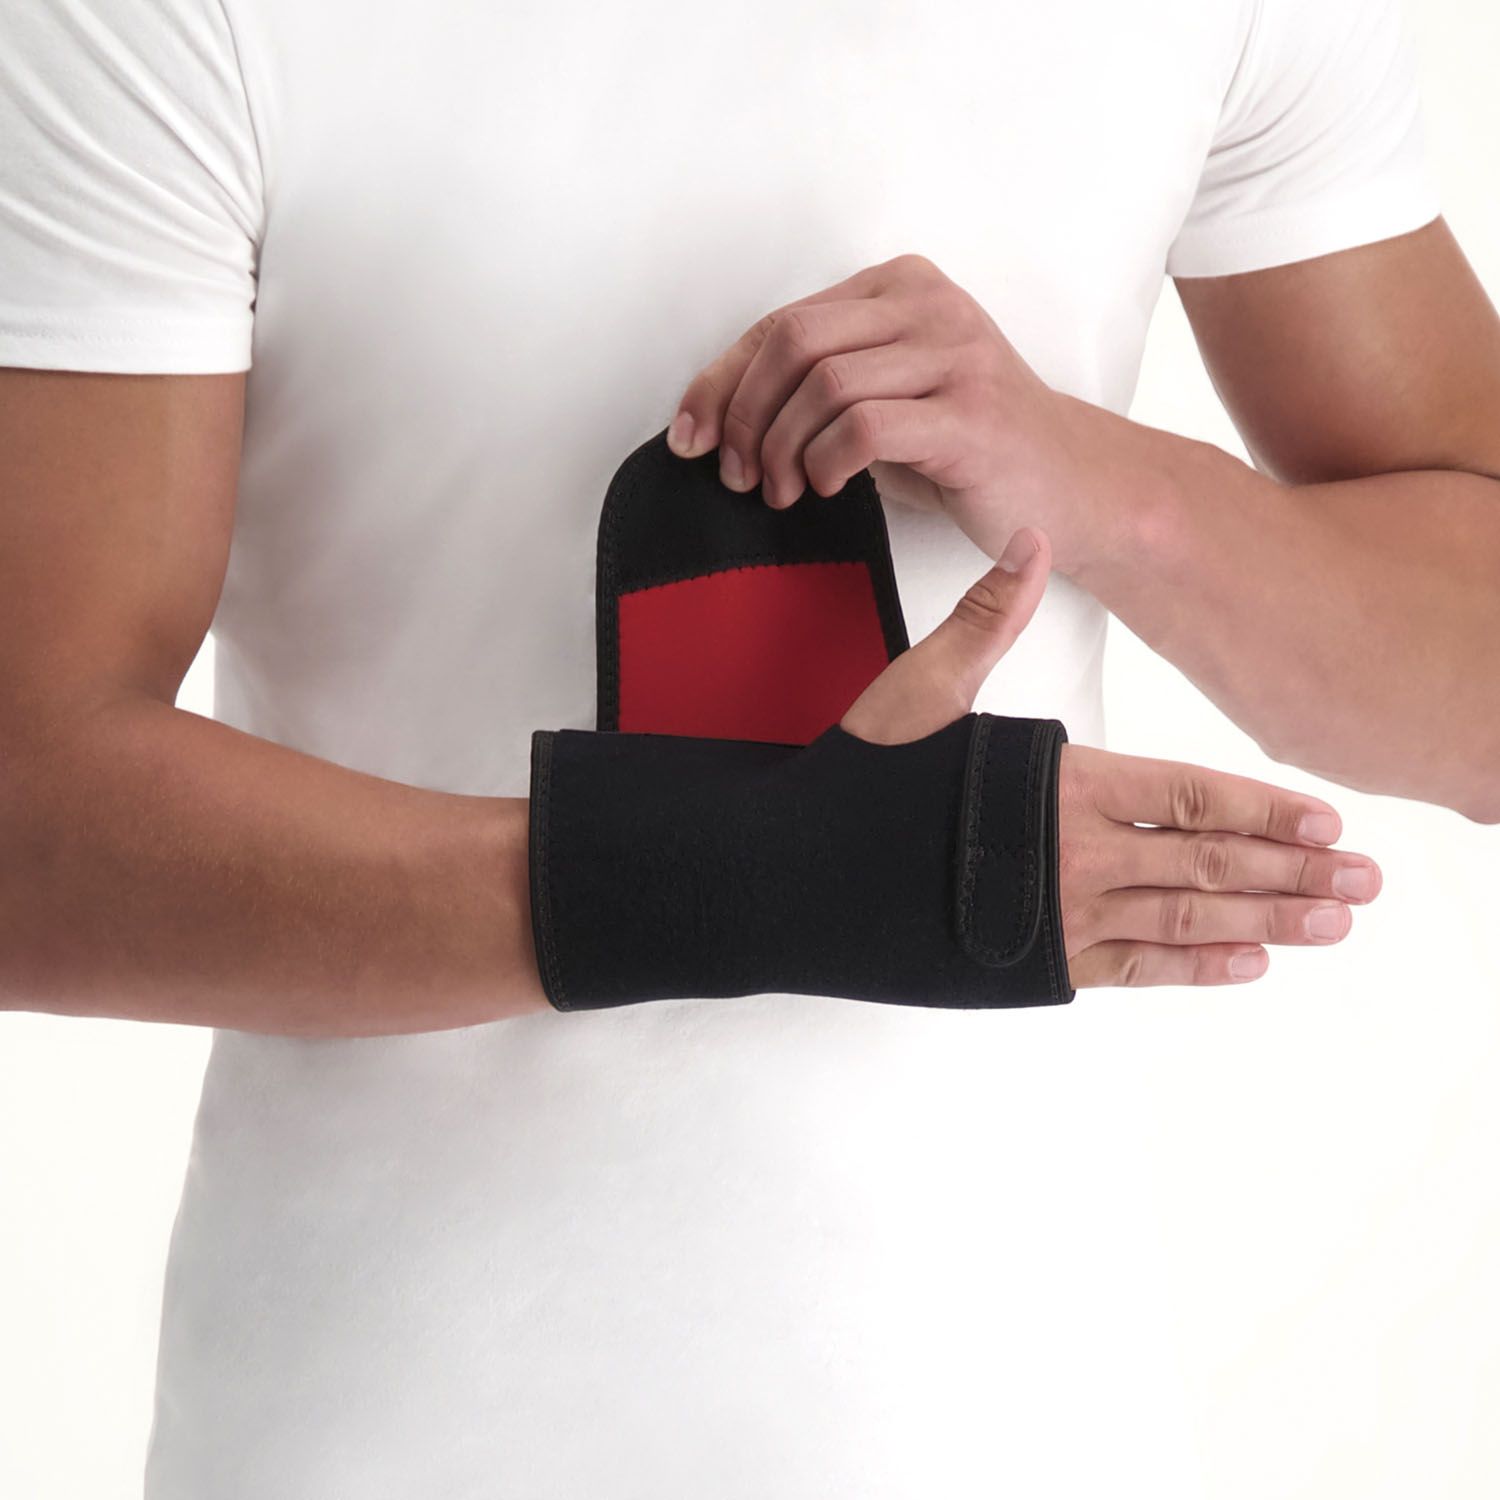 dunimed carpal tunnel syndrome wrist support banner